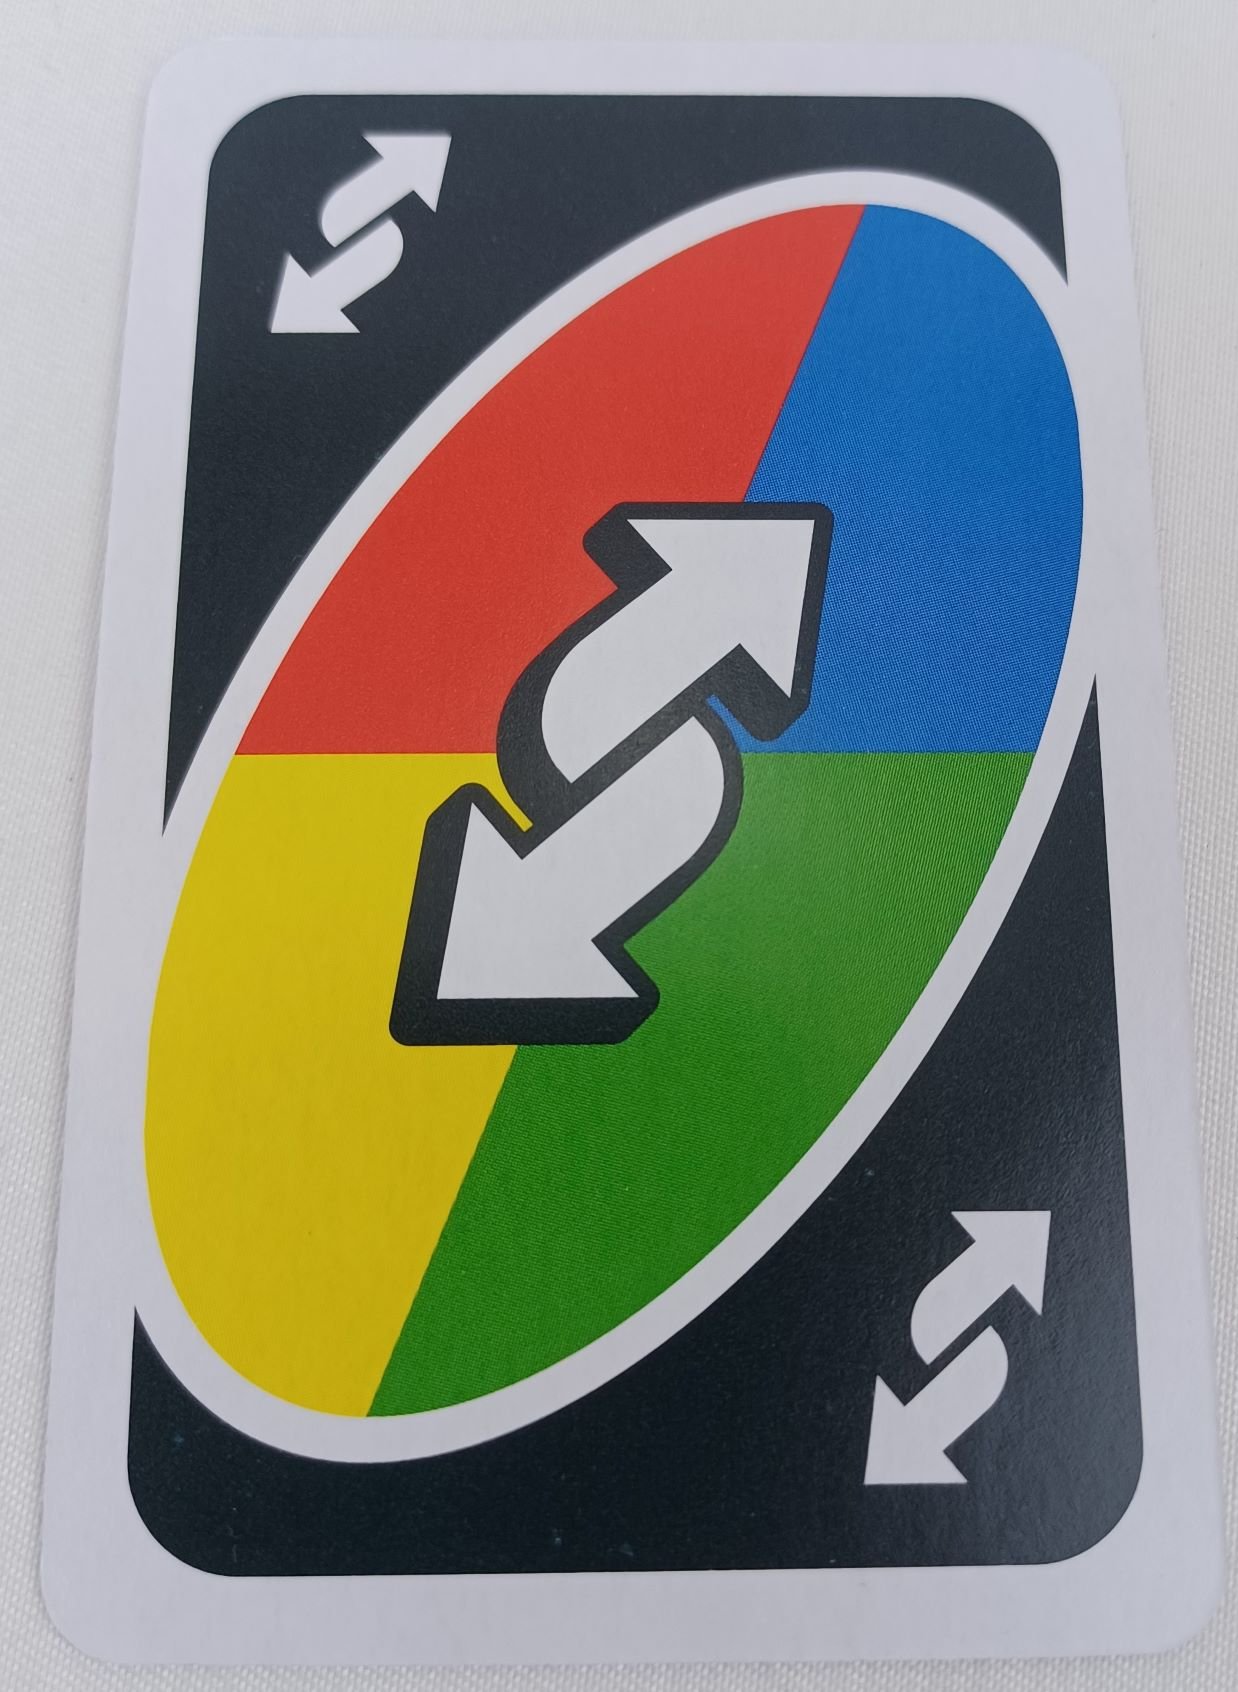 1 Uno Reverse Card - What does the reverse card mean in uno?